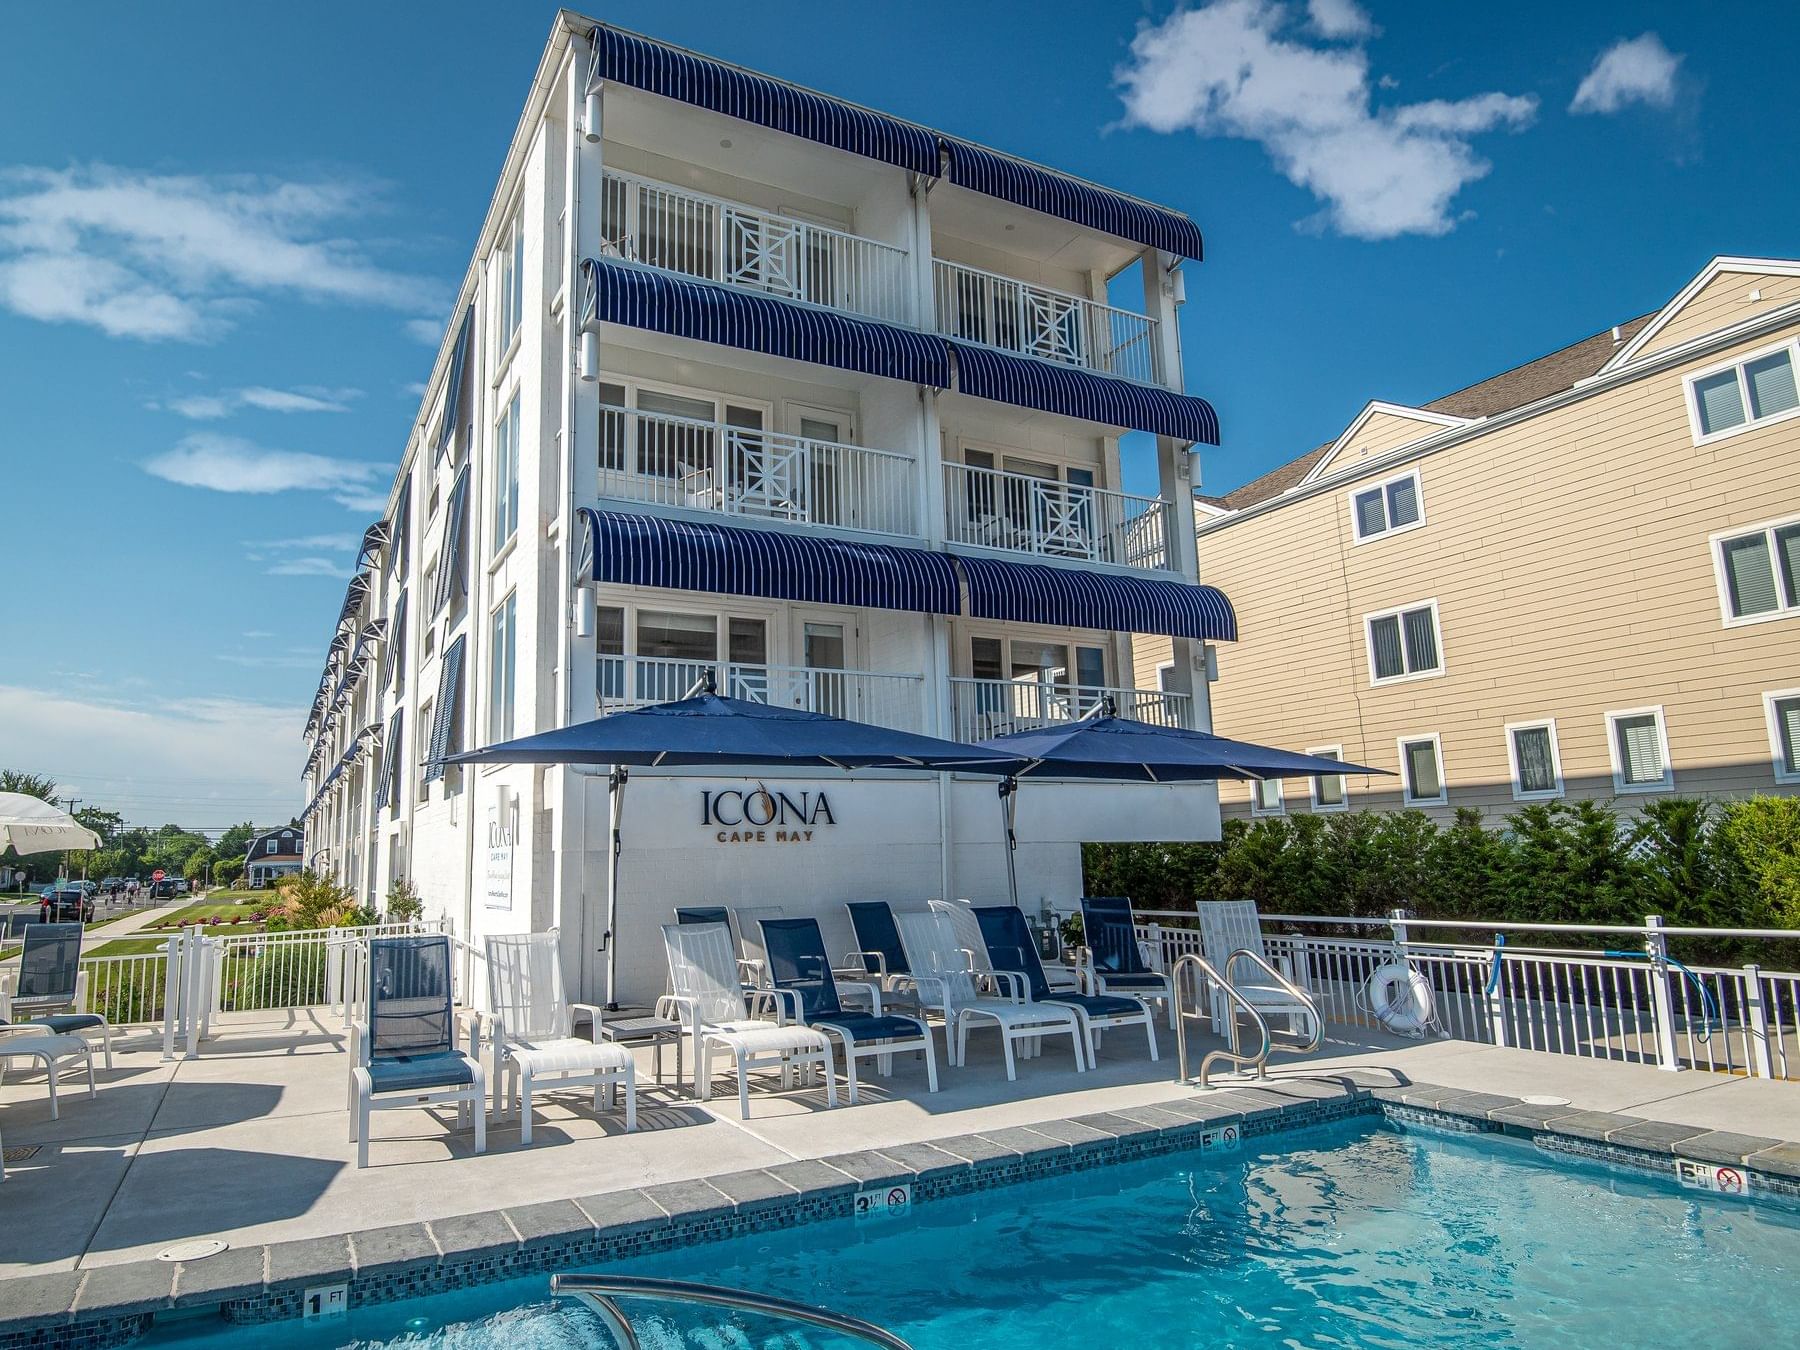 The exterior view of the outdoor pool area at our oceanfront hotel in Cape May